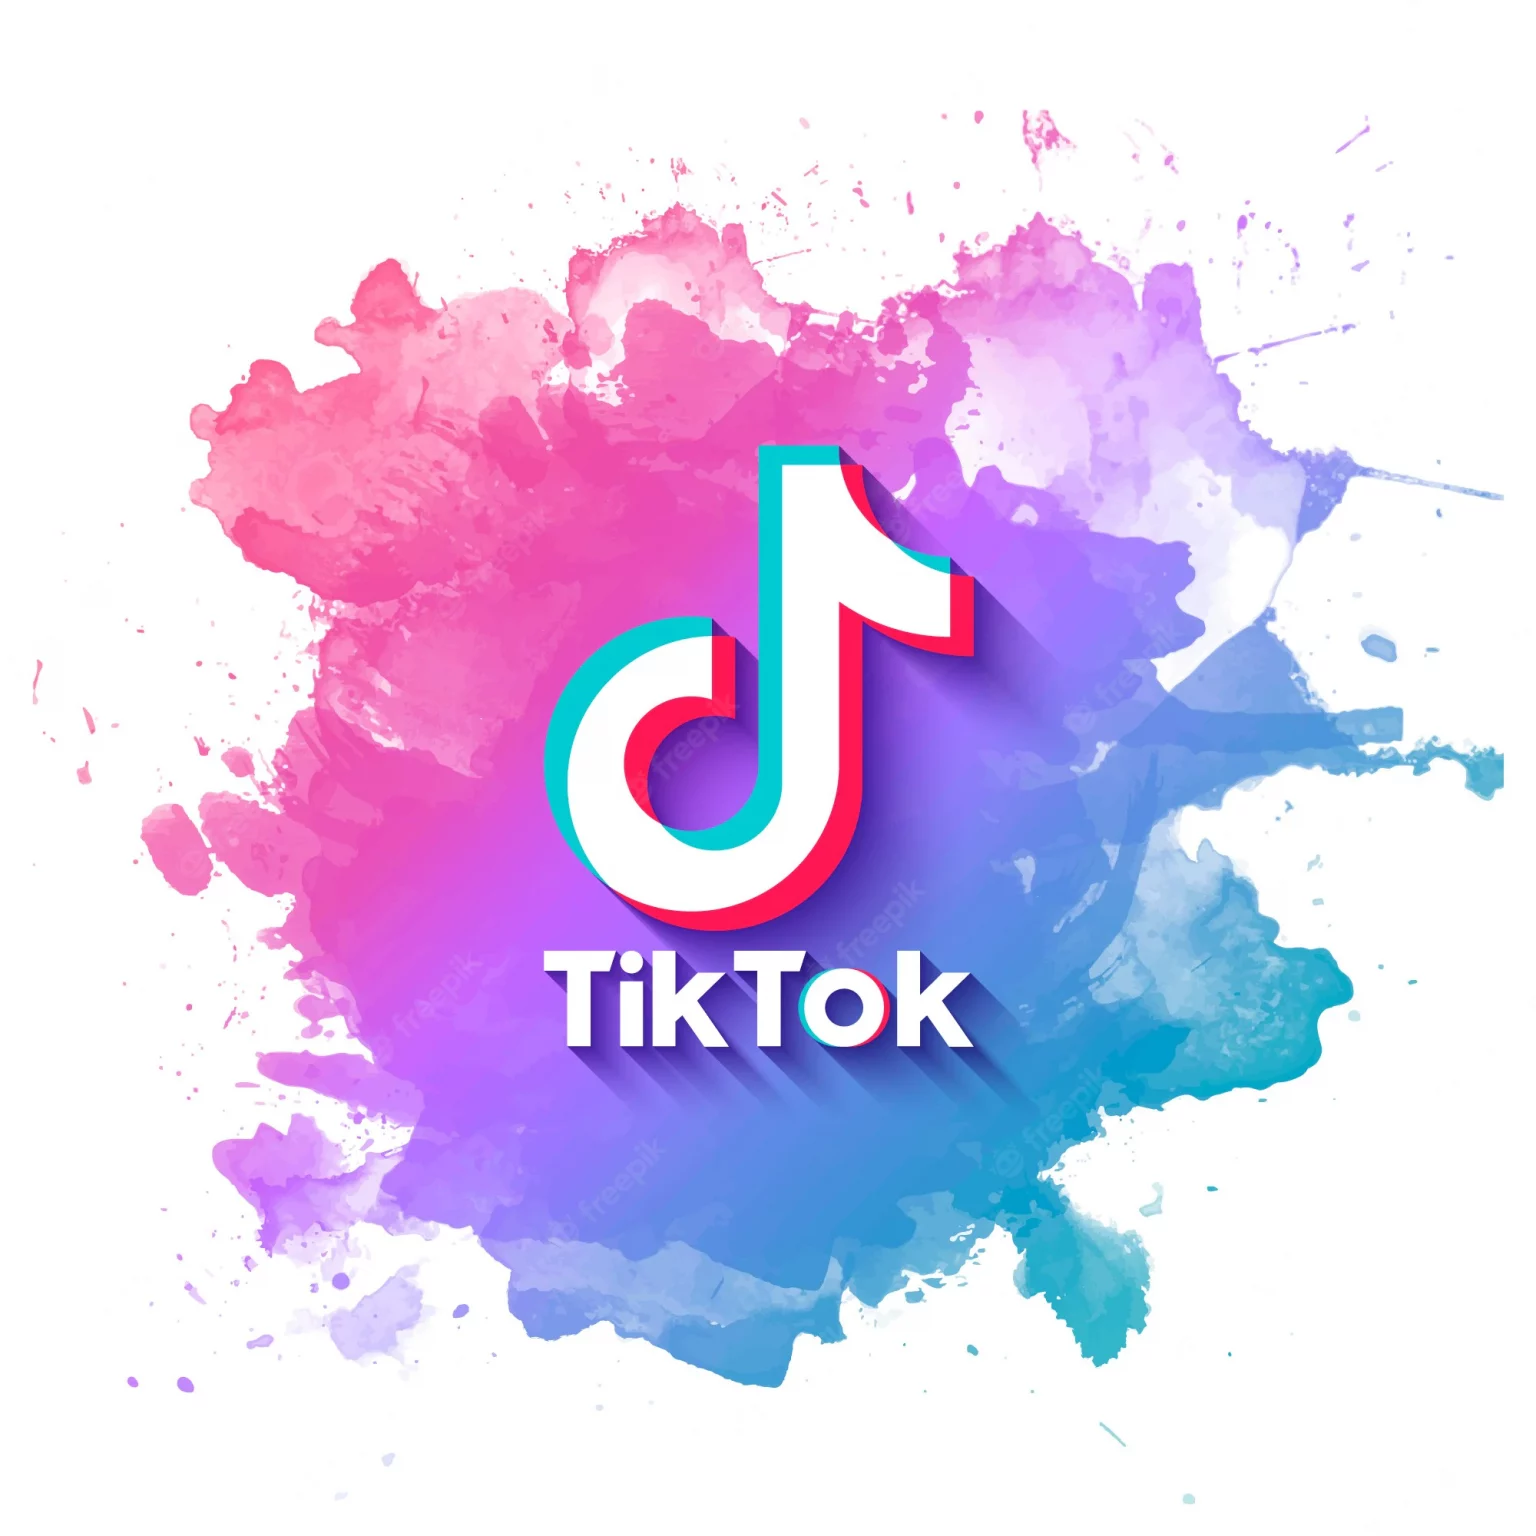 TikTok adds monetization tools for creators, including Stripe-powered Tips and Video Gifts, starting in the US, the UK, Germany, France, Italy, and Spain (Sarah Perez/TechCrunch)